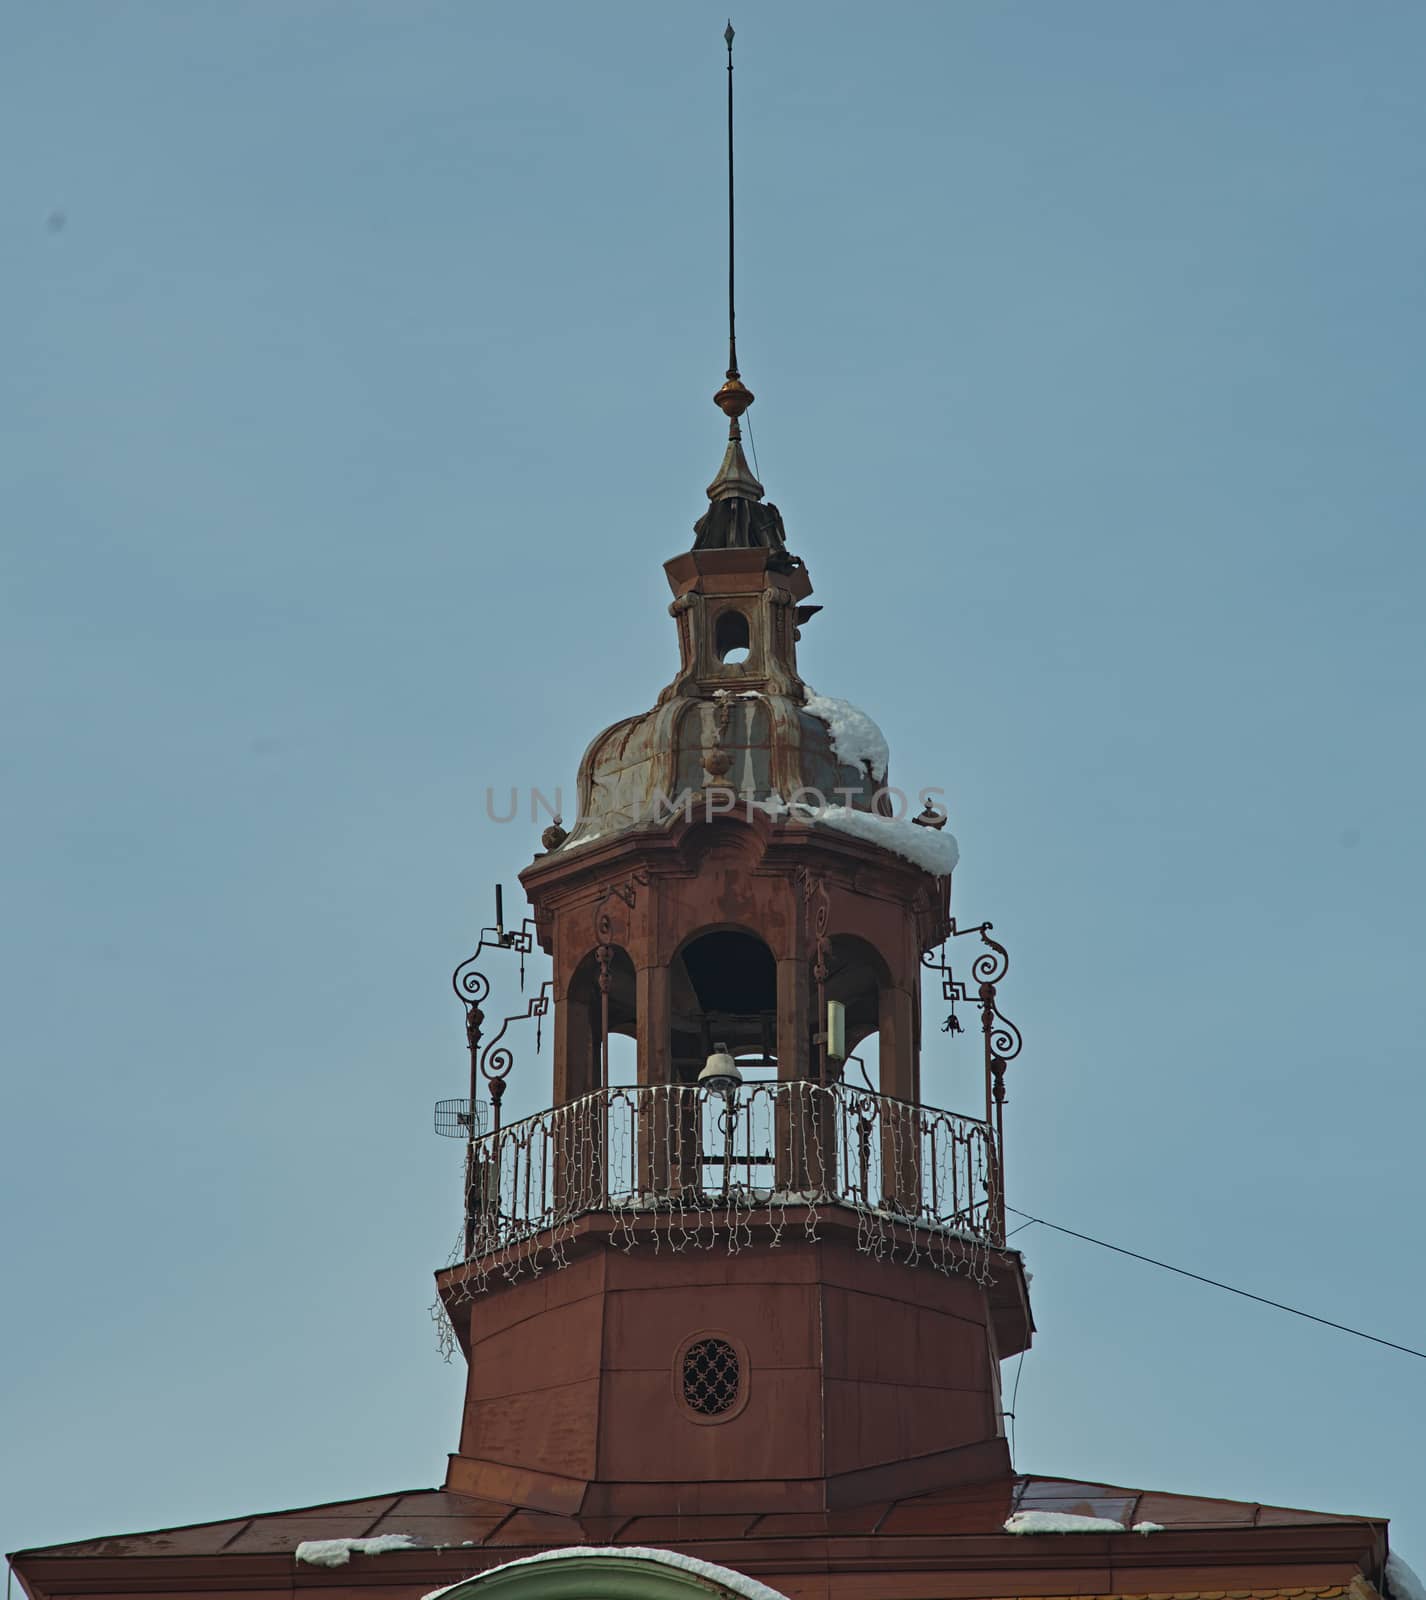 Tower with open balcony on top of baroque building